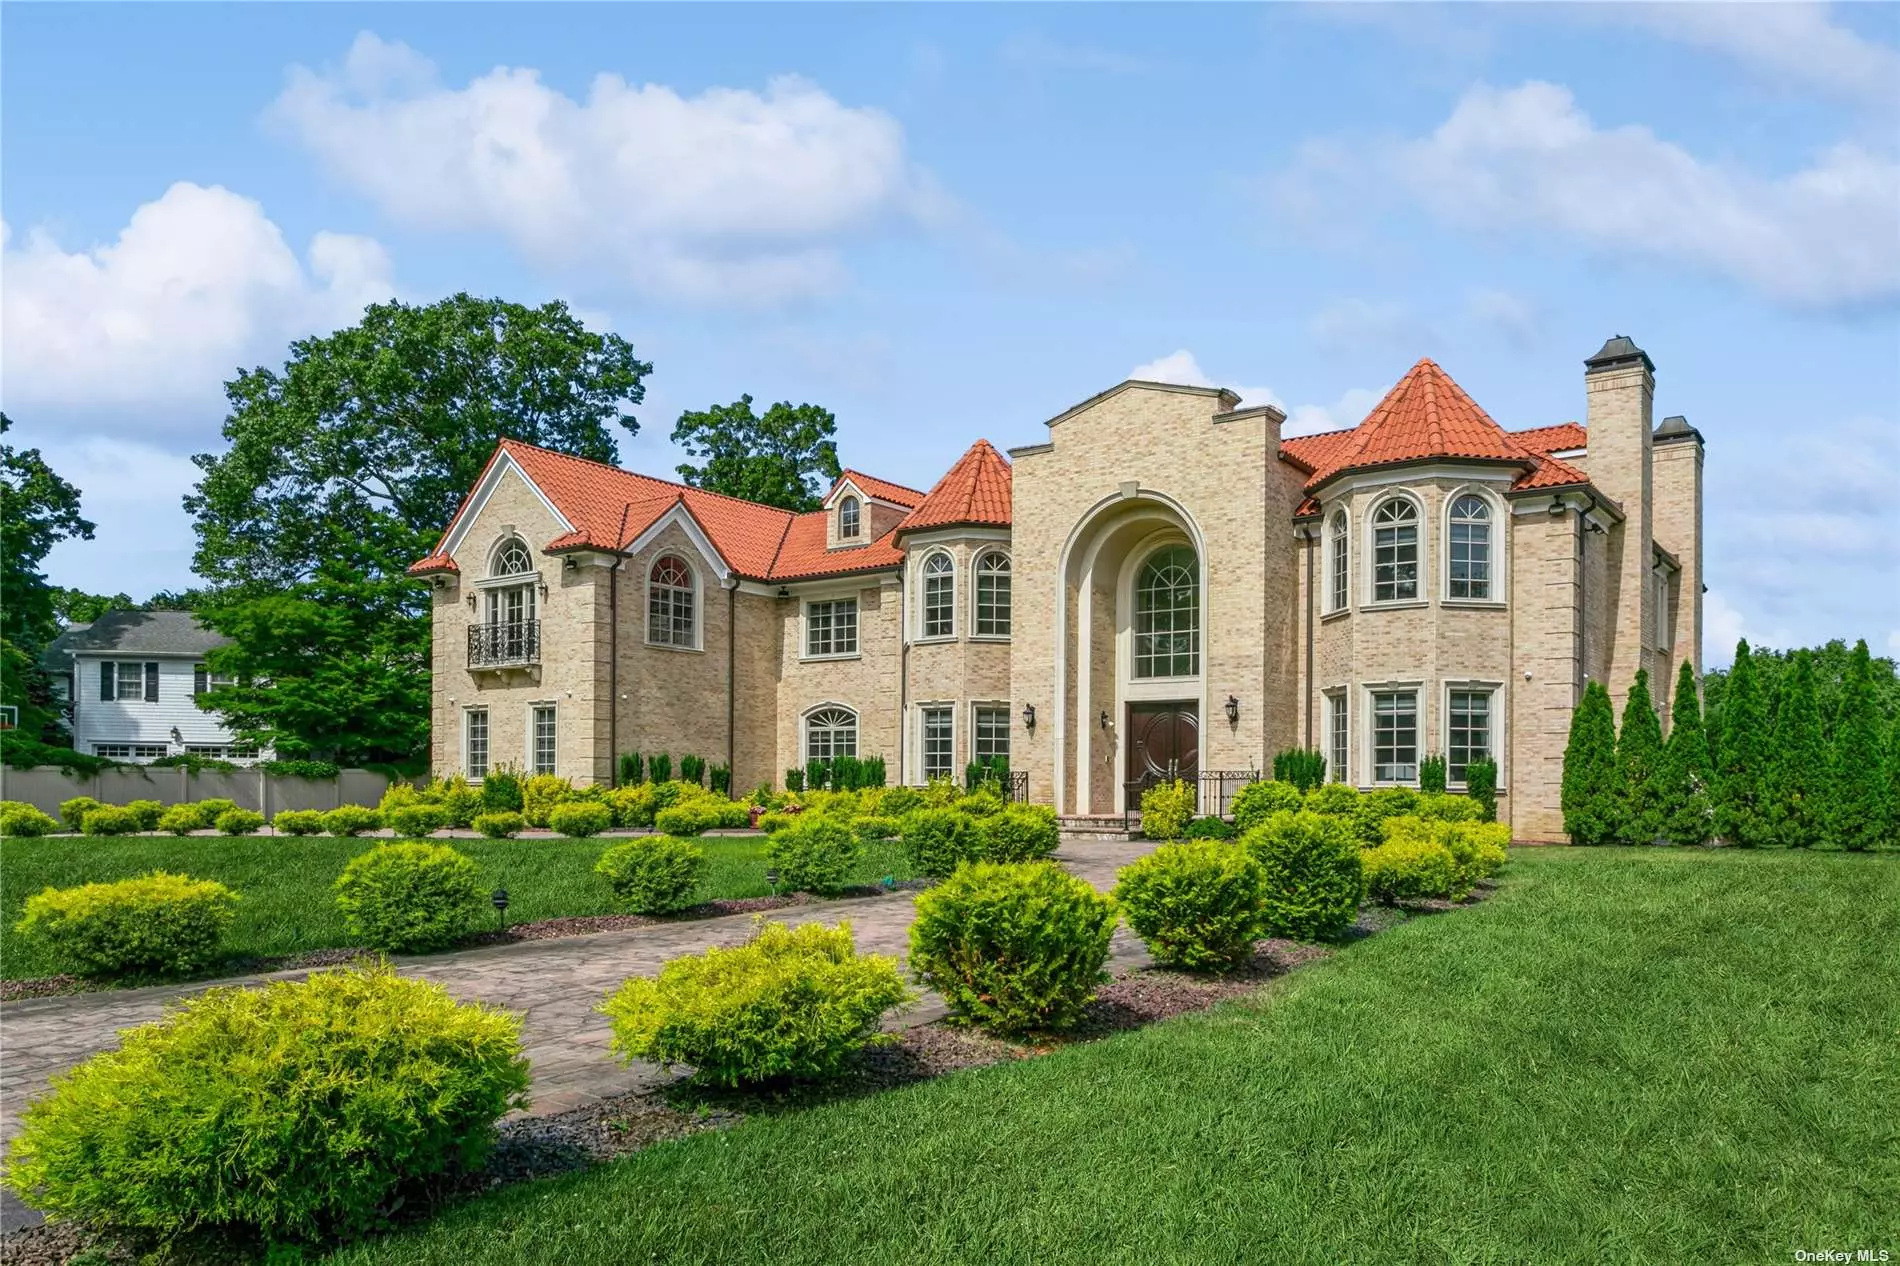 Experience the grandeur of this exquisite, newly constructed 11-bedroom contemporary colonial brick mansion totaling 14, 835 sq ft of living space in Back Lawrence, on a lot just shy of an acre. Every detail of this home showcases the highest level of craftsmanship and design. There are 13 radiant heat zones, 8 HVAC and full house generator. As you step inside, you are greeted by a breathtaking two-story center hall adorned with a dazzling Swarovski crystal chandelier. The main floor encompasses luxurious living room with fireplace, an elegant formal dining room, a stately family room with fireplace along with 3 Andersen doors leading onto a 1600 square foot patio, a formal library, plus an ensuite guest bedroom and a 3 car heated garage. Prepare to be amazed by a huge designer kitchen, featuring two stunning granite-topped islands, butler pantry, four top-of-the-line Wolf ovens, three sinks and two Miele dishwashers. With four Subzero refrigerators, this kitchen is equipped to meet the needs of even the most discerning professional chef. Ascend the grand staircase to the second floor, where six spacious bedrooms await, boasting high ceilings and impressive architectural details. Your own private oasis awaits in the master bedroom, complete with a generous sitting area, 4 walk-in closets, and a magnificent bathroom with modern Bain Ultra Whirlpool. An elevator services all the floors. The lower level of this masterpiece home offers a pleasant surprise with its nine-foot ceilings. A custom-built walnut bar takes center stage in an expansive and elegant entertainment area with a theater, billiard room and gym, perfect for hosting memorable gatherings. Let this be the home of your dreams, where you can create beautiful and lasting family memories! Close to many houses of worship!